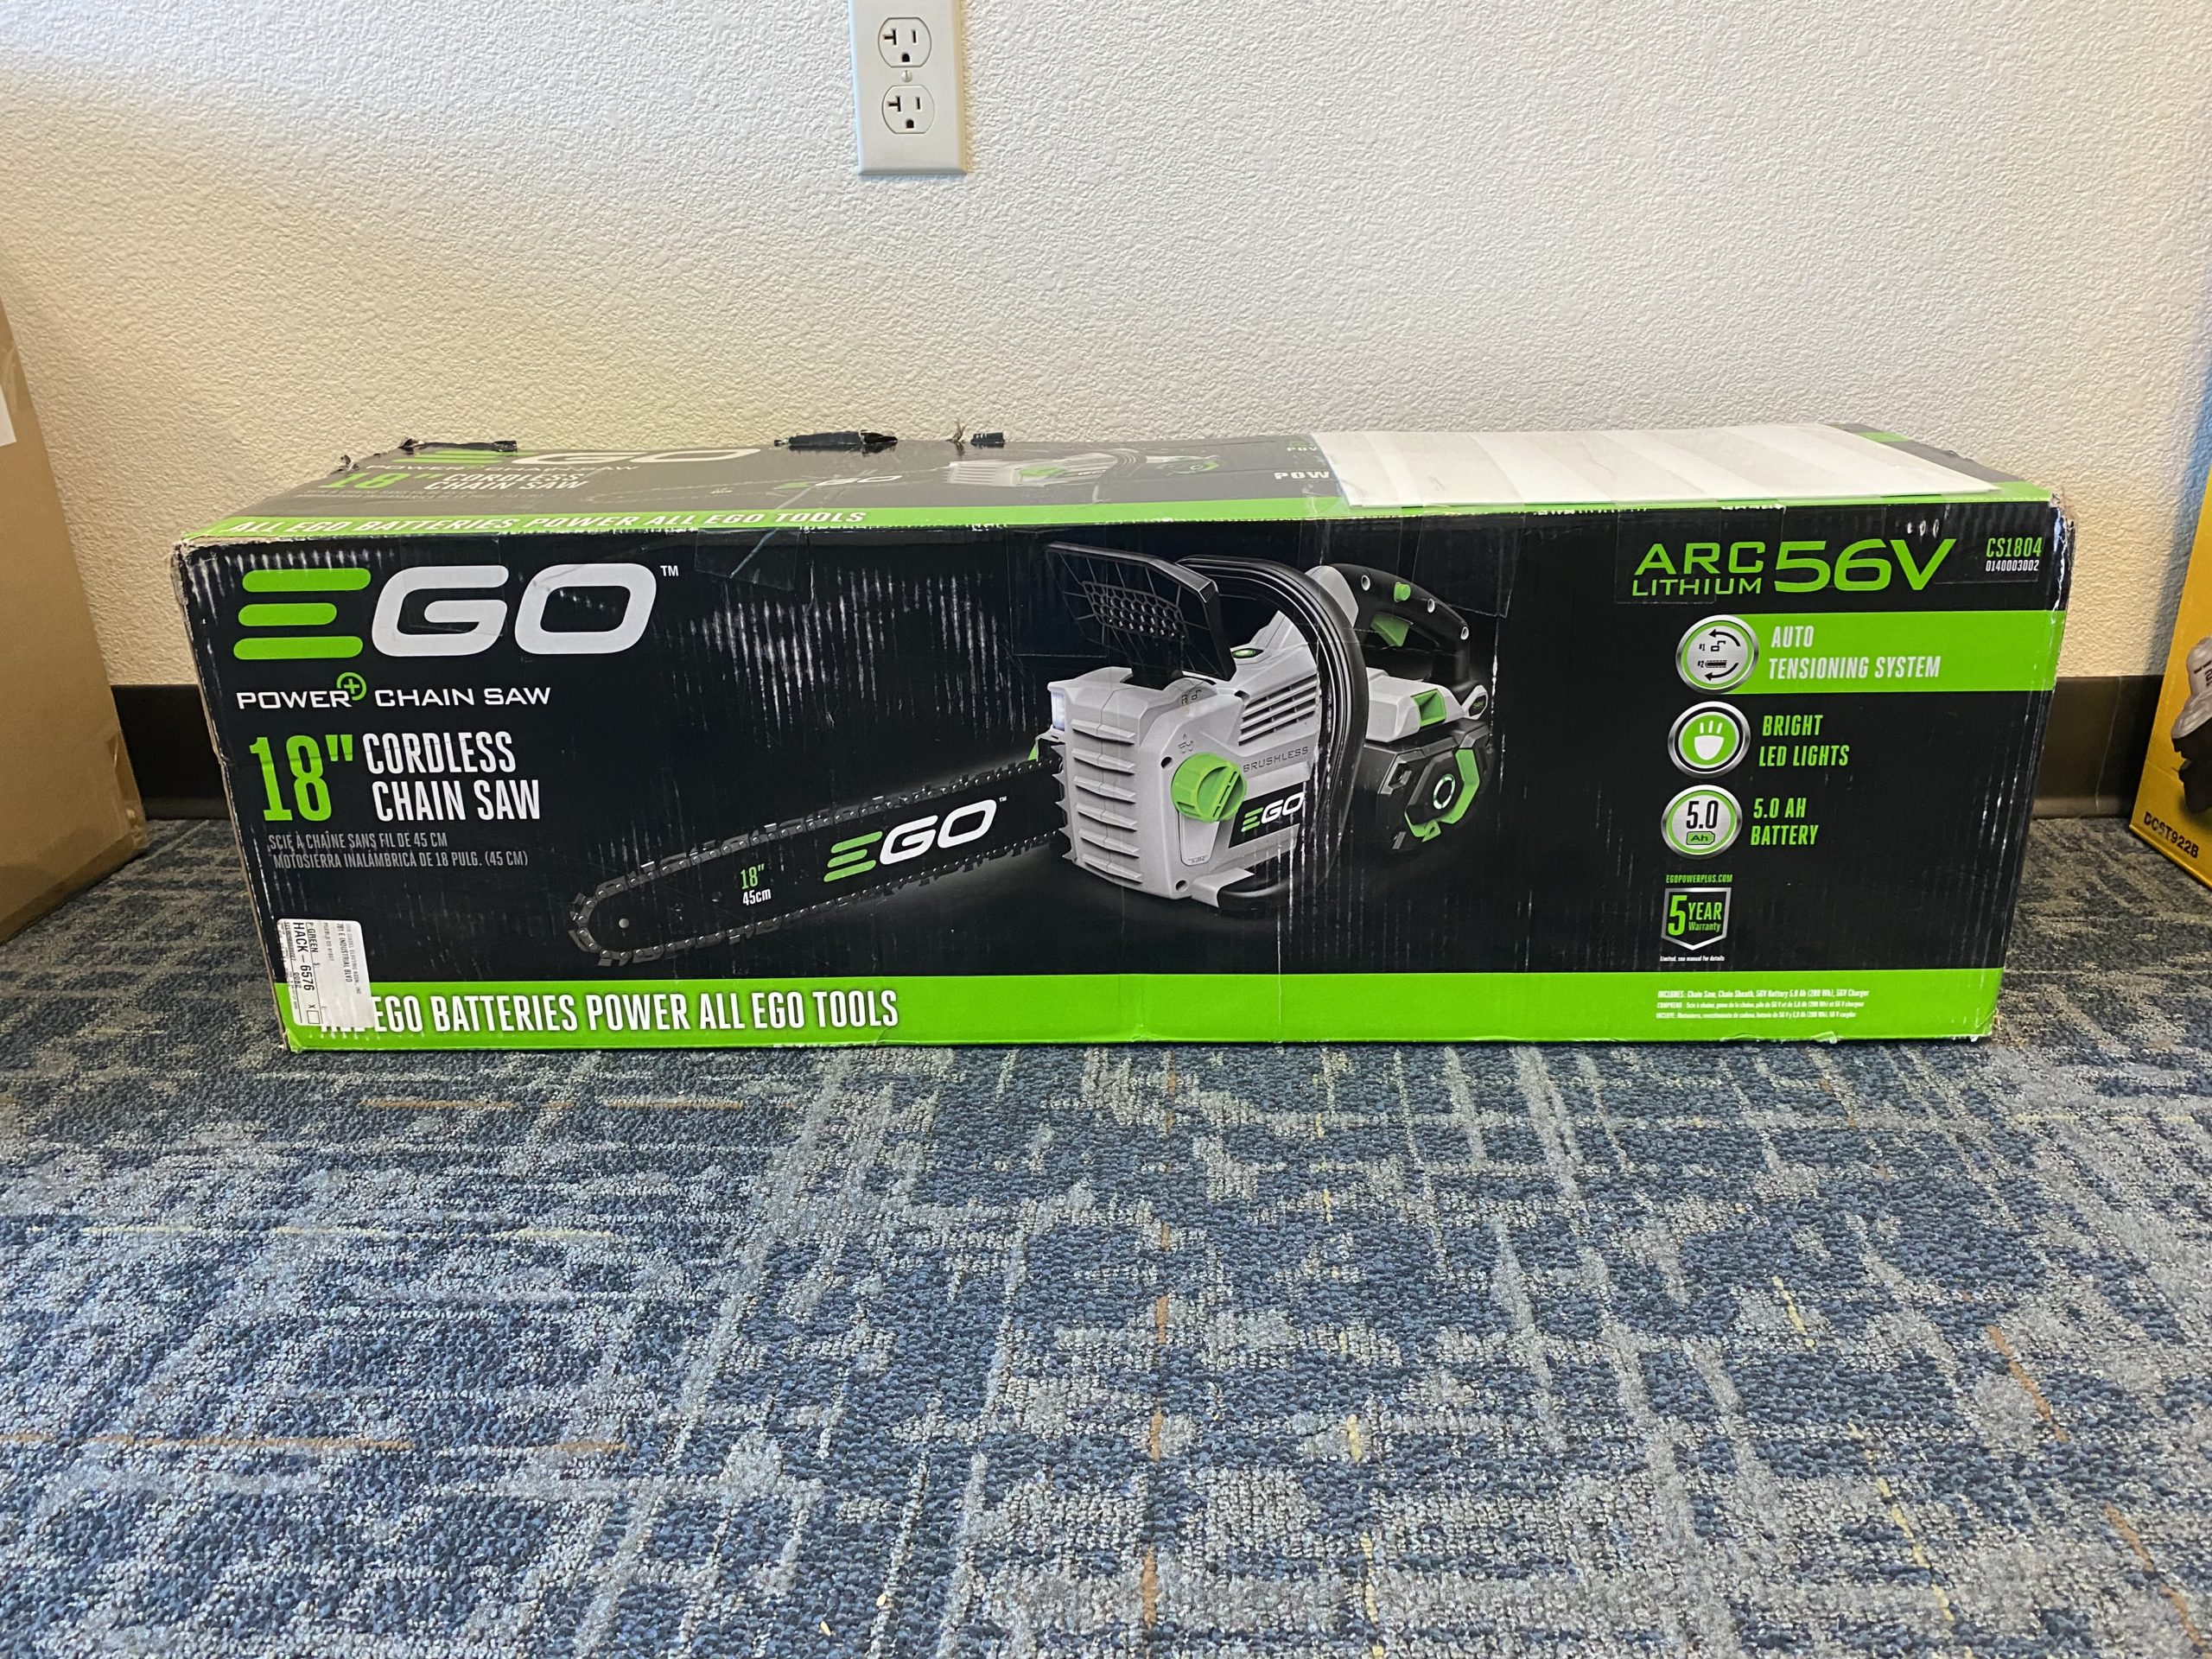 EGO 18" cordless electric chainsaw donated from Tri-State Generation & Transmission.